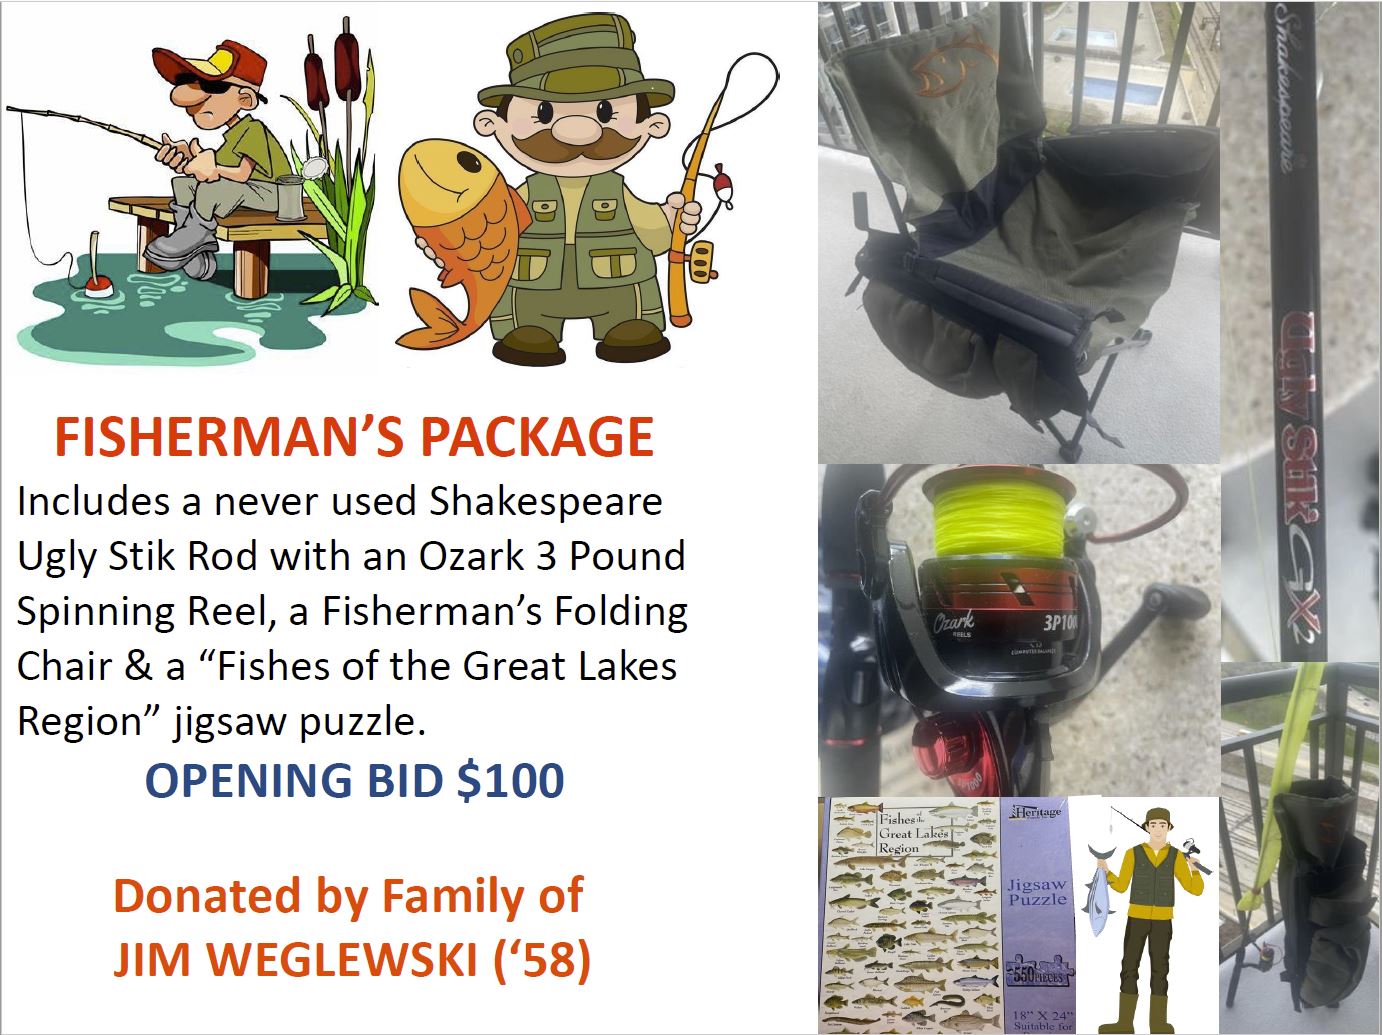 Featured image for “FISHERMAN’S PACKAGE”